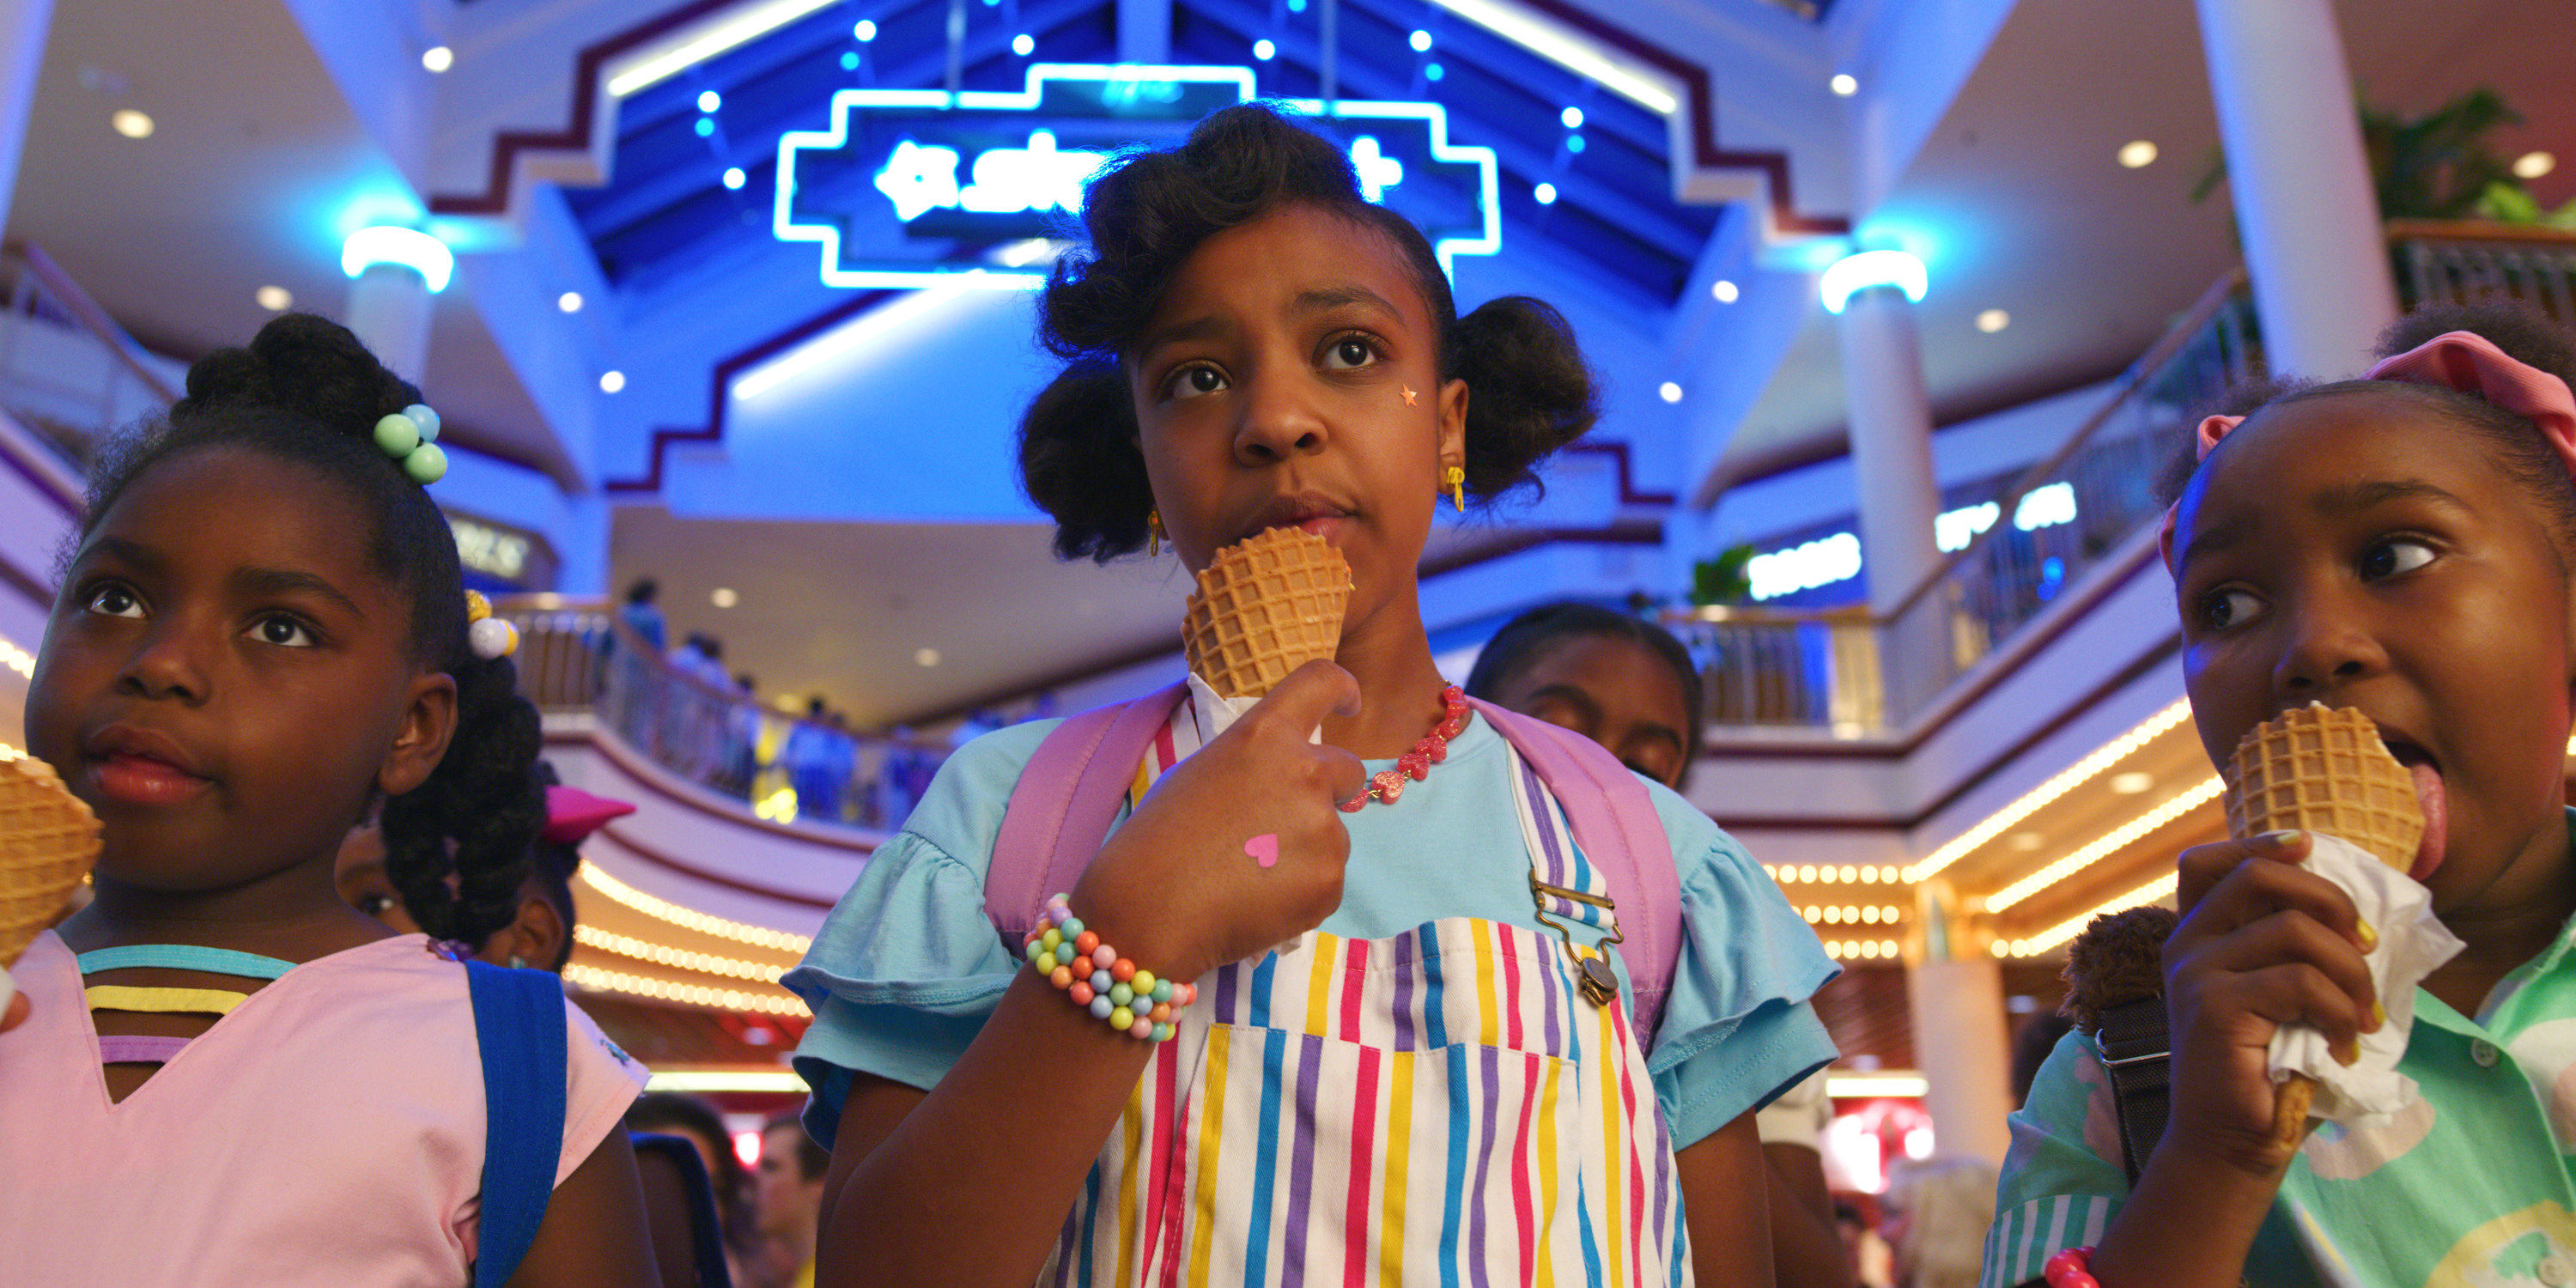 Priah with other children eating ice cream cones